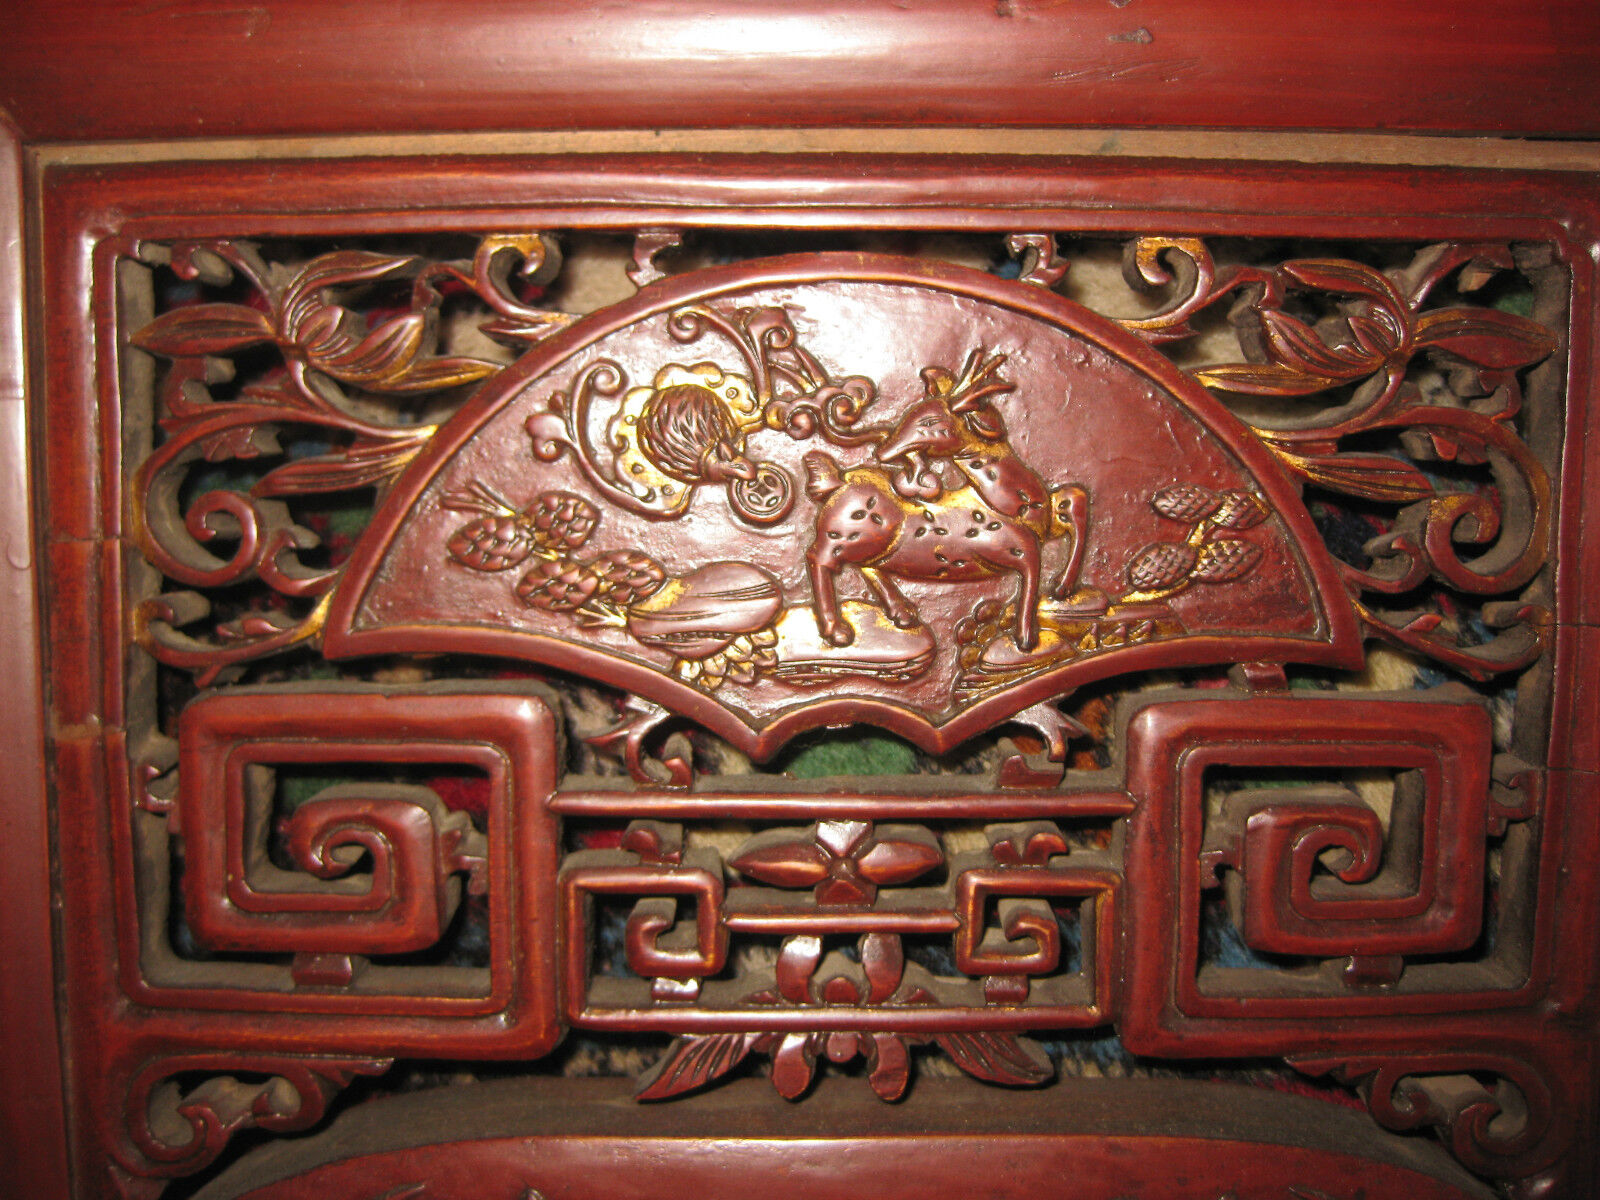 Chinese antique carved wood canope of opium or wedding  bed, Qing dynasty Без бренда - фотография #9